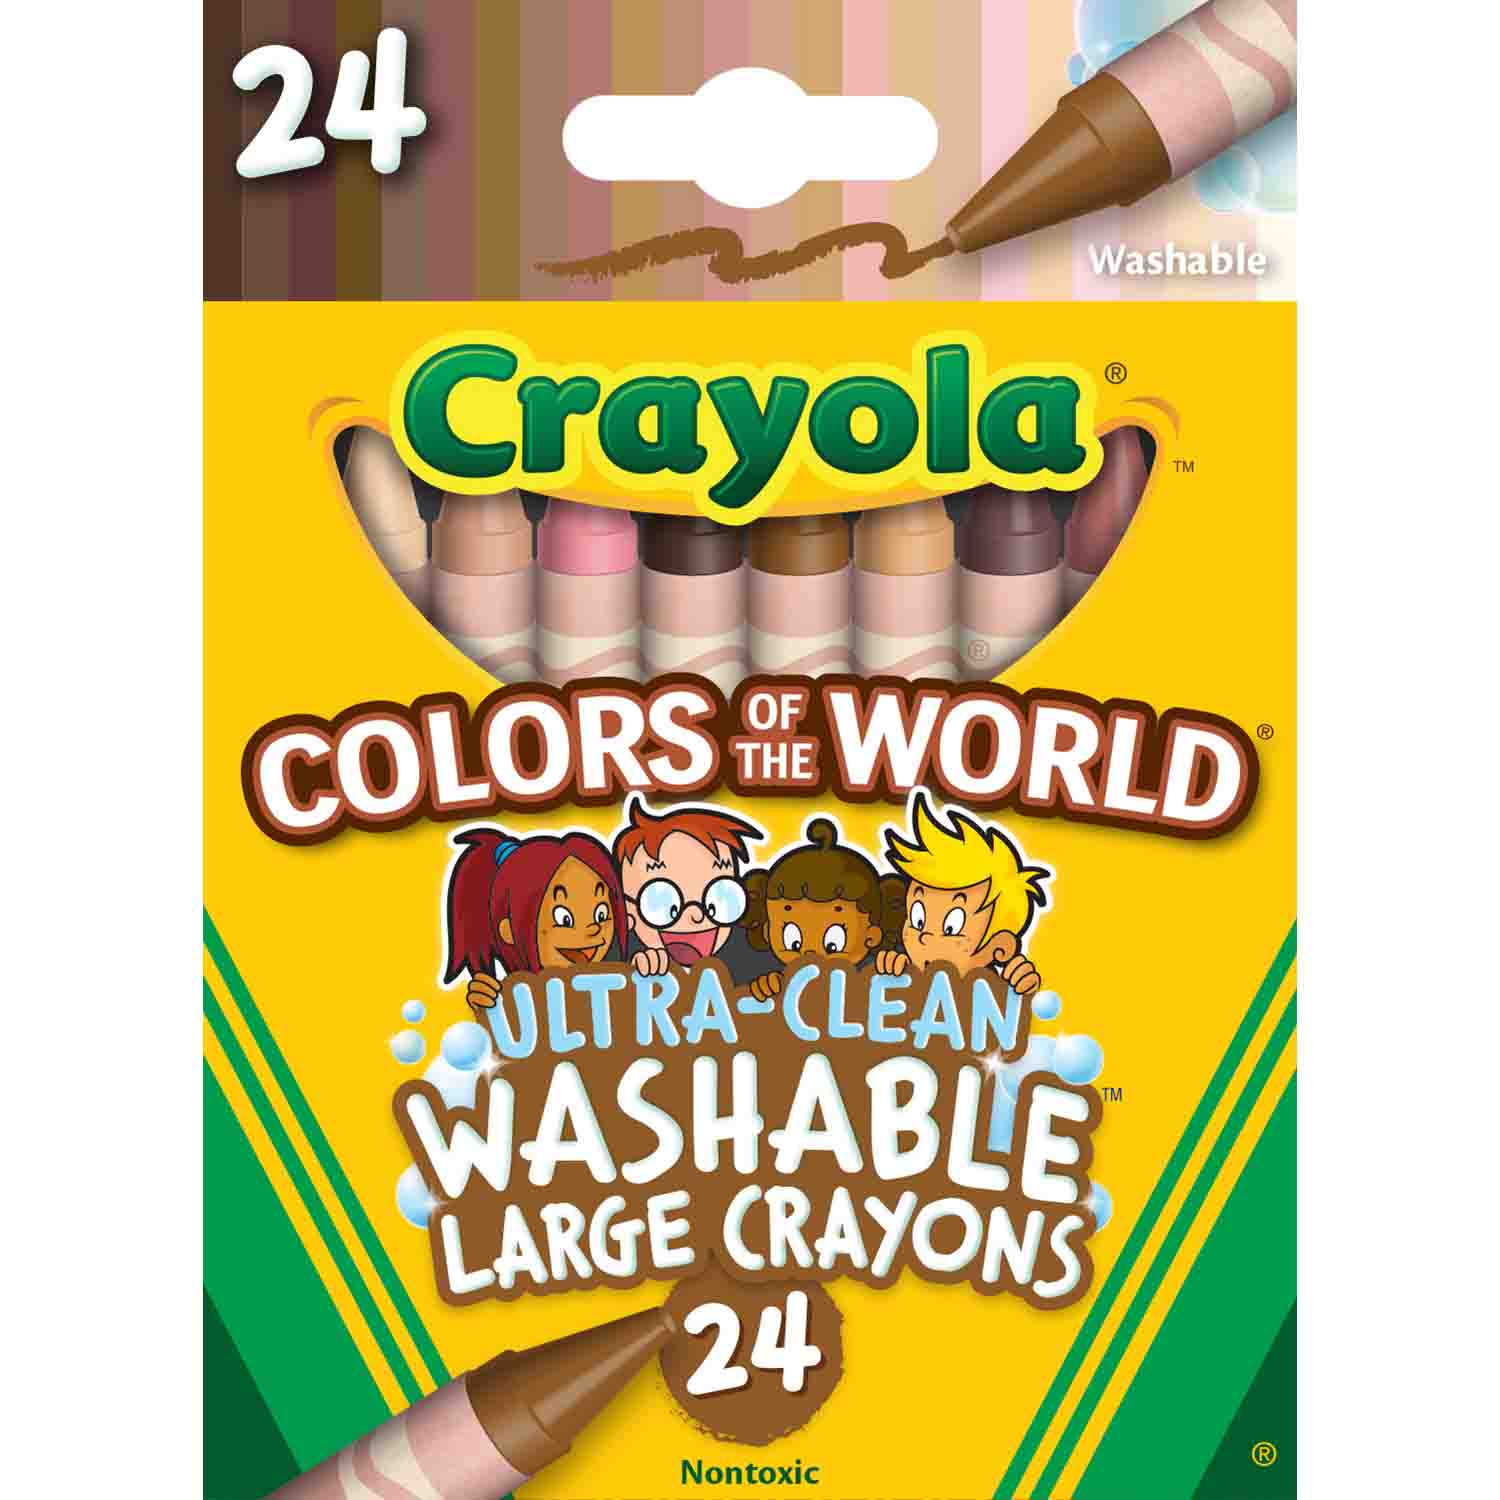 Crayola Large Crayons, Colors of The World, 24 Count